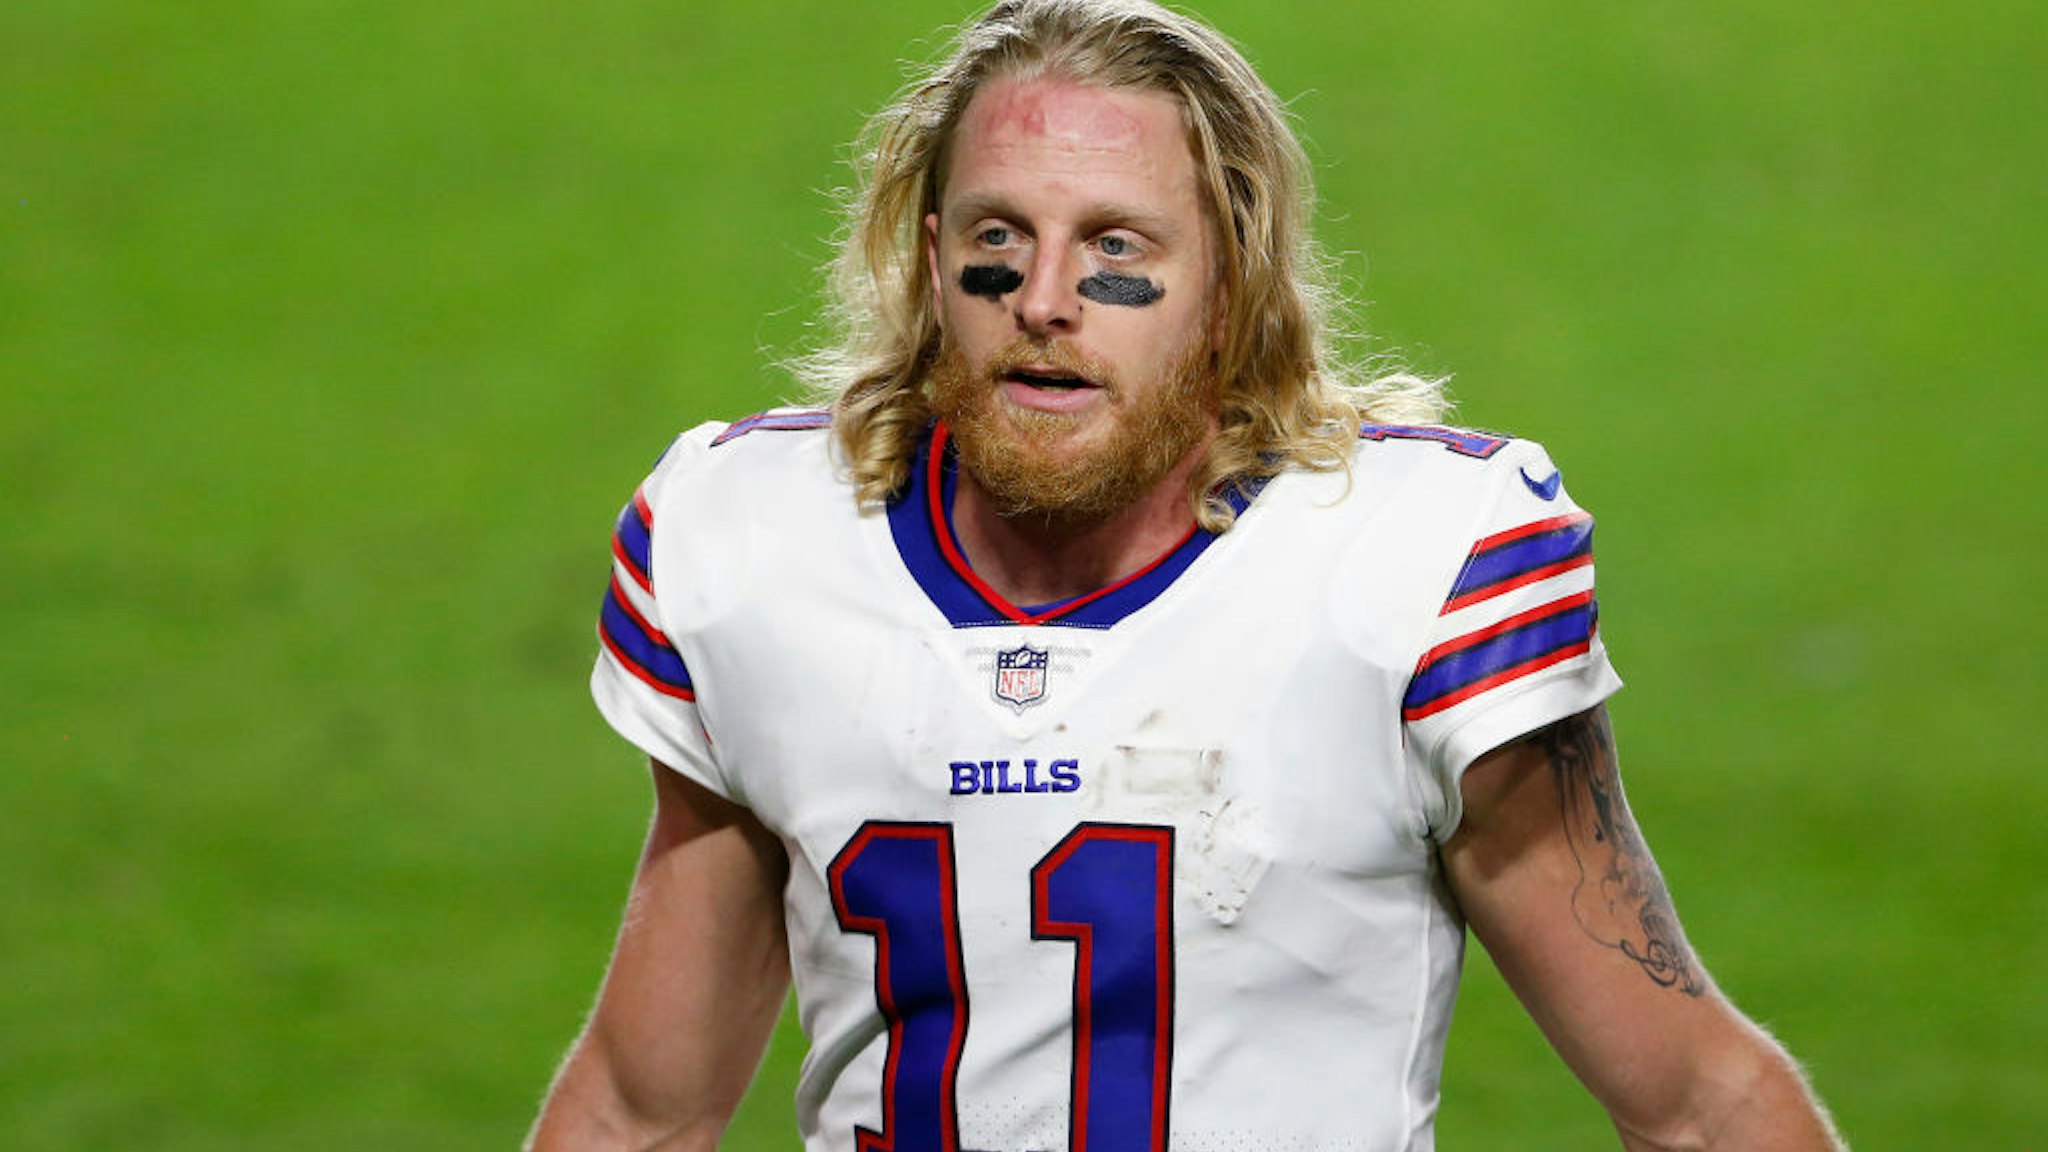 GLENDALE, ARIZONA - DECEMBER 07: Wide receiver Cole Beasley #11 of the Buffalo Bills during the NFL football game against the San Francisco 49ers at State Farm Stadium on December 07, 2020 in Glendale, Arizona. (Photo by Ralph Freso/Getty Images)